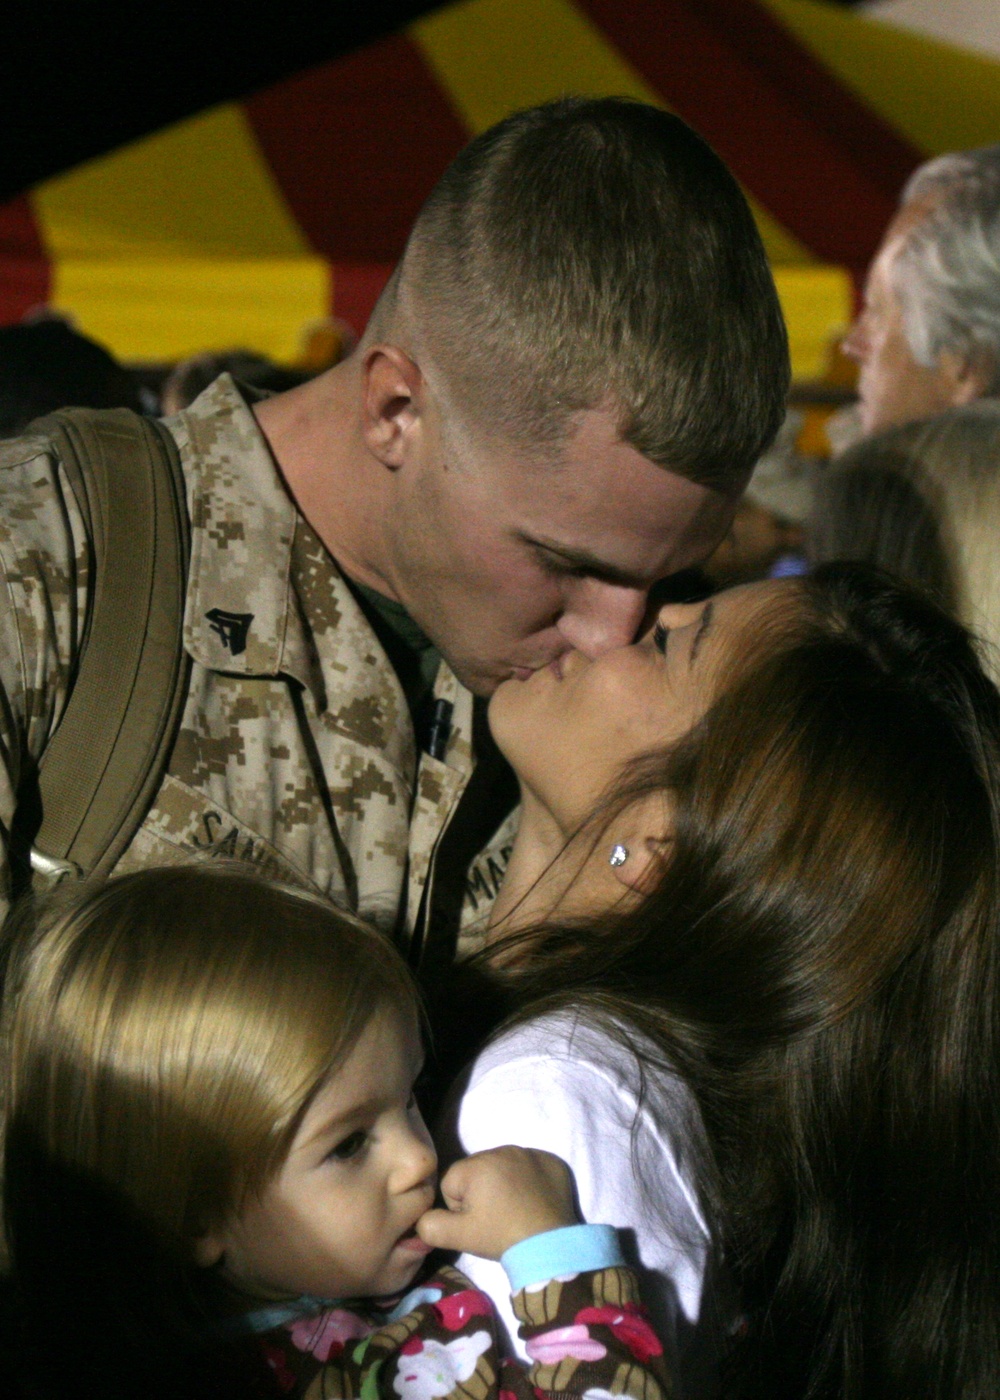 MWSS-272 returns from Afghanistan to family, friends